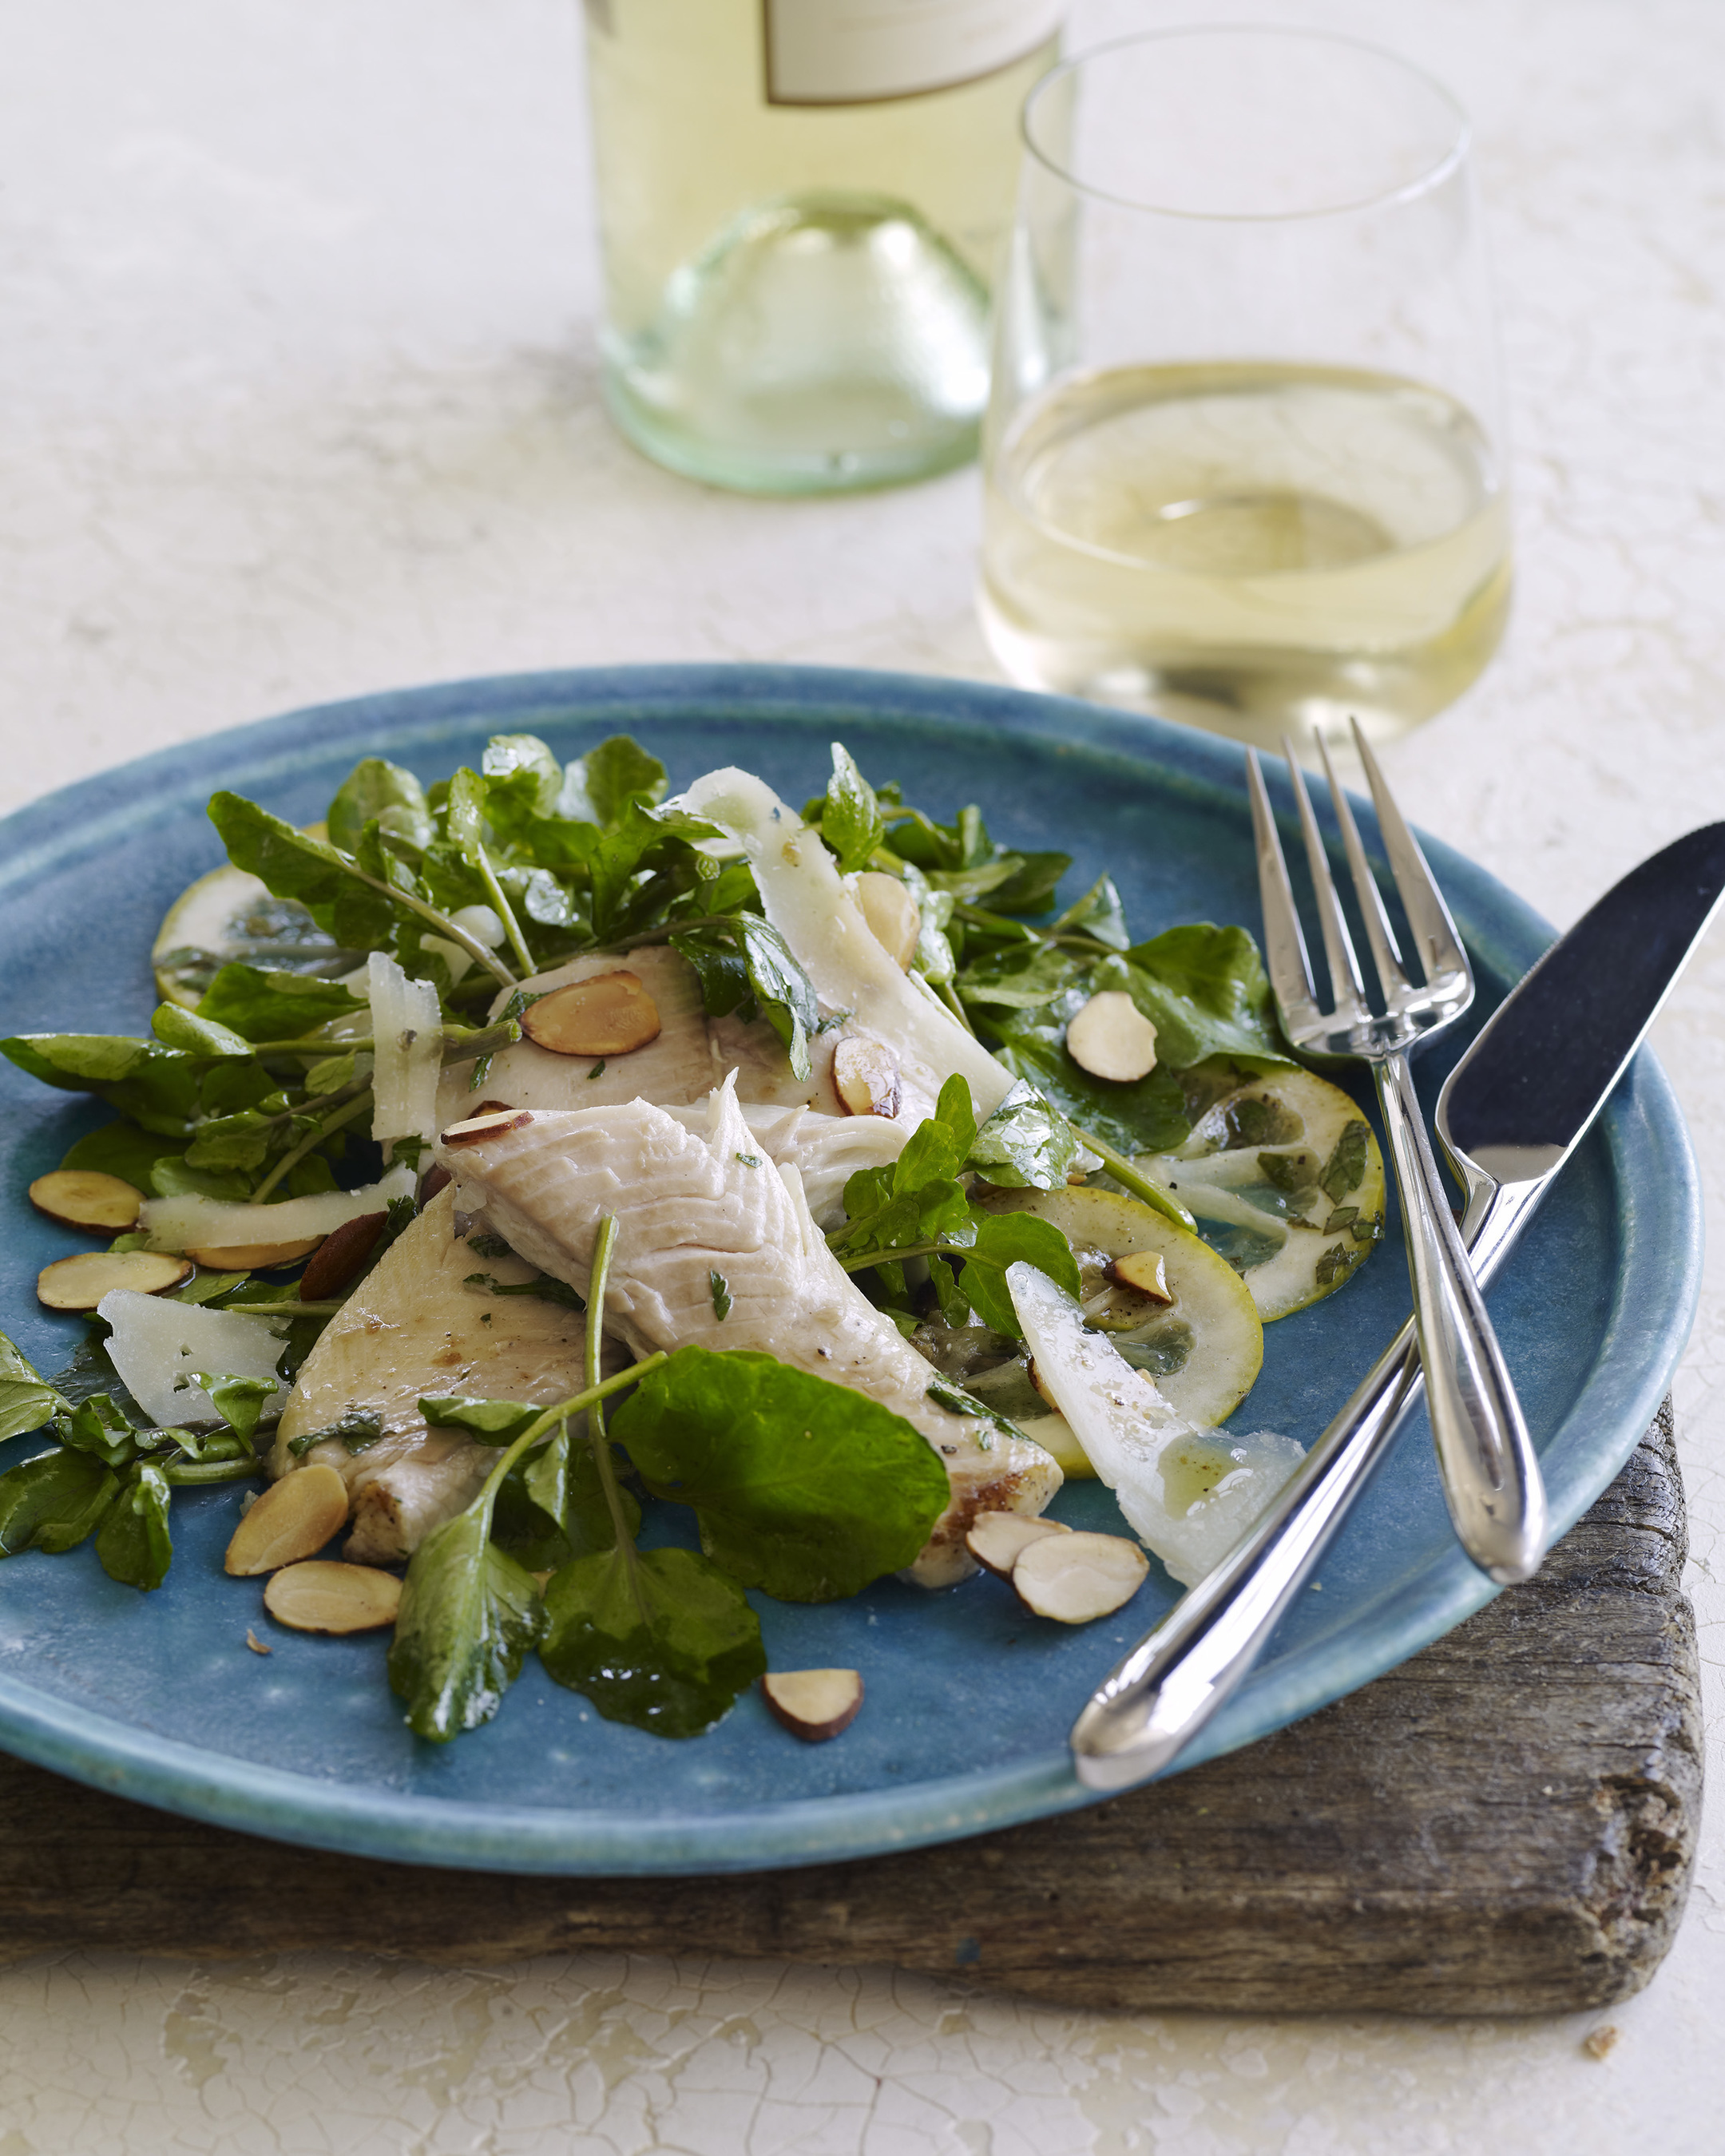 Watercress Trout Salad is one of the wine country recipes featured in Wine Institute's new Down to Earth book on California sustainable winegrowing. (PRNewsFoto/Wine Institute)